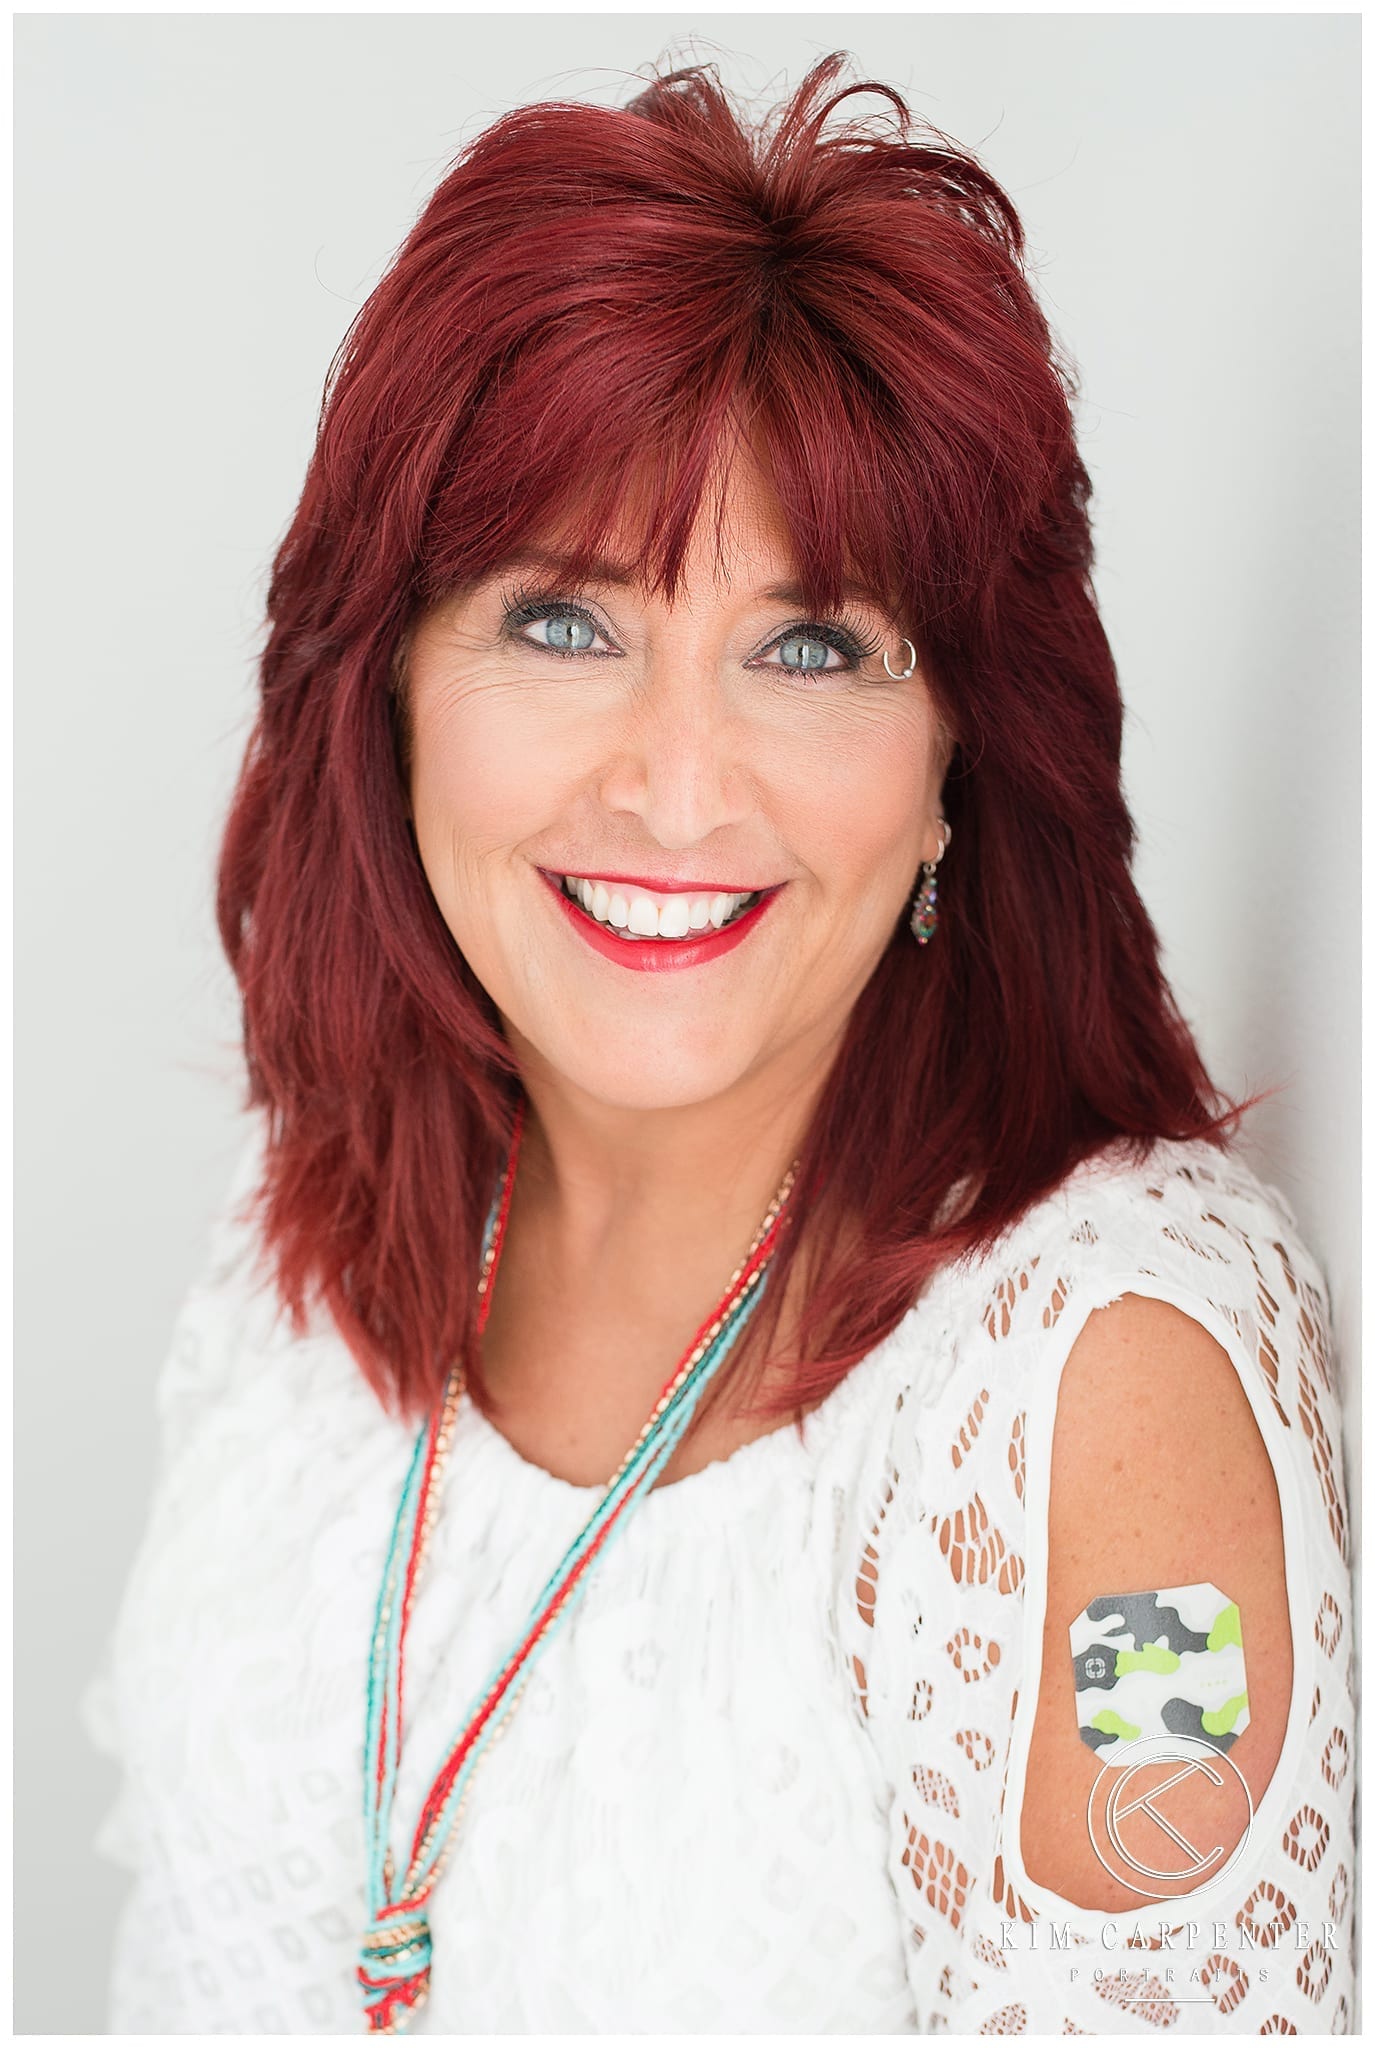 Woman wearing a white lace shirt and a Thrive sticker is showing on her shoulder. Lakeland Photographer, professional headshots